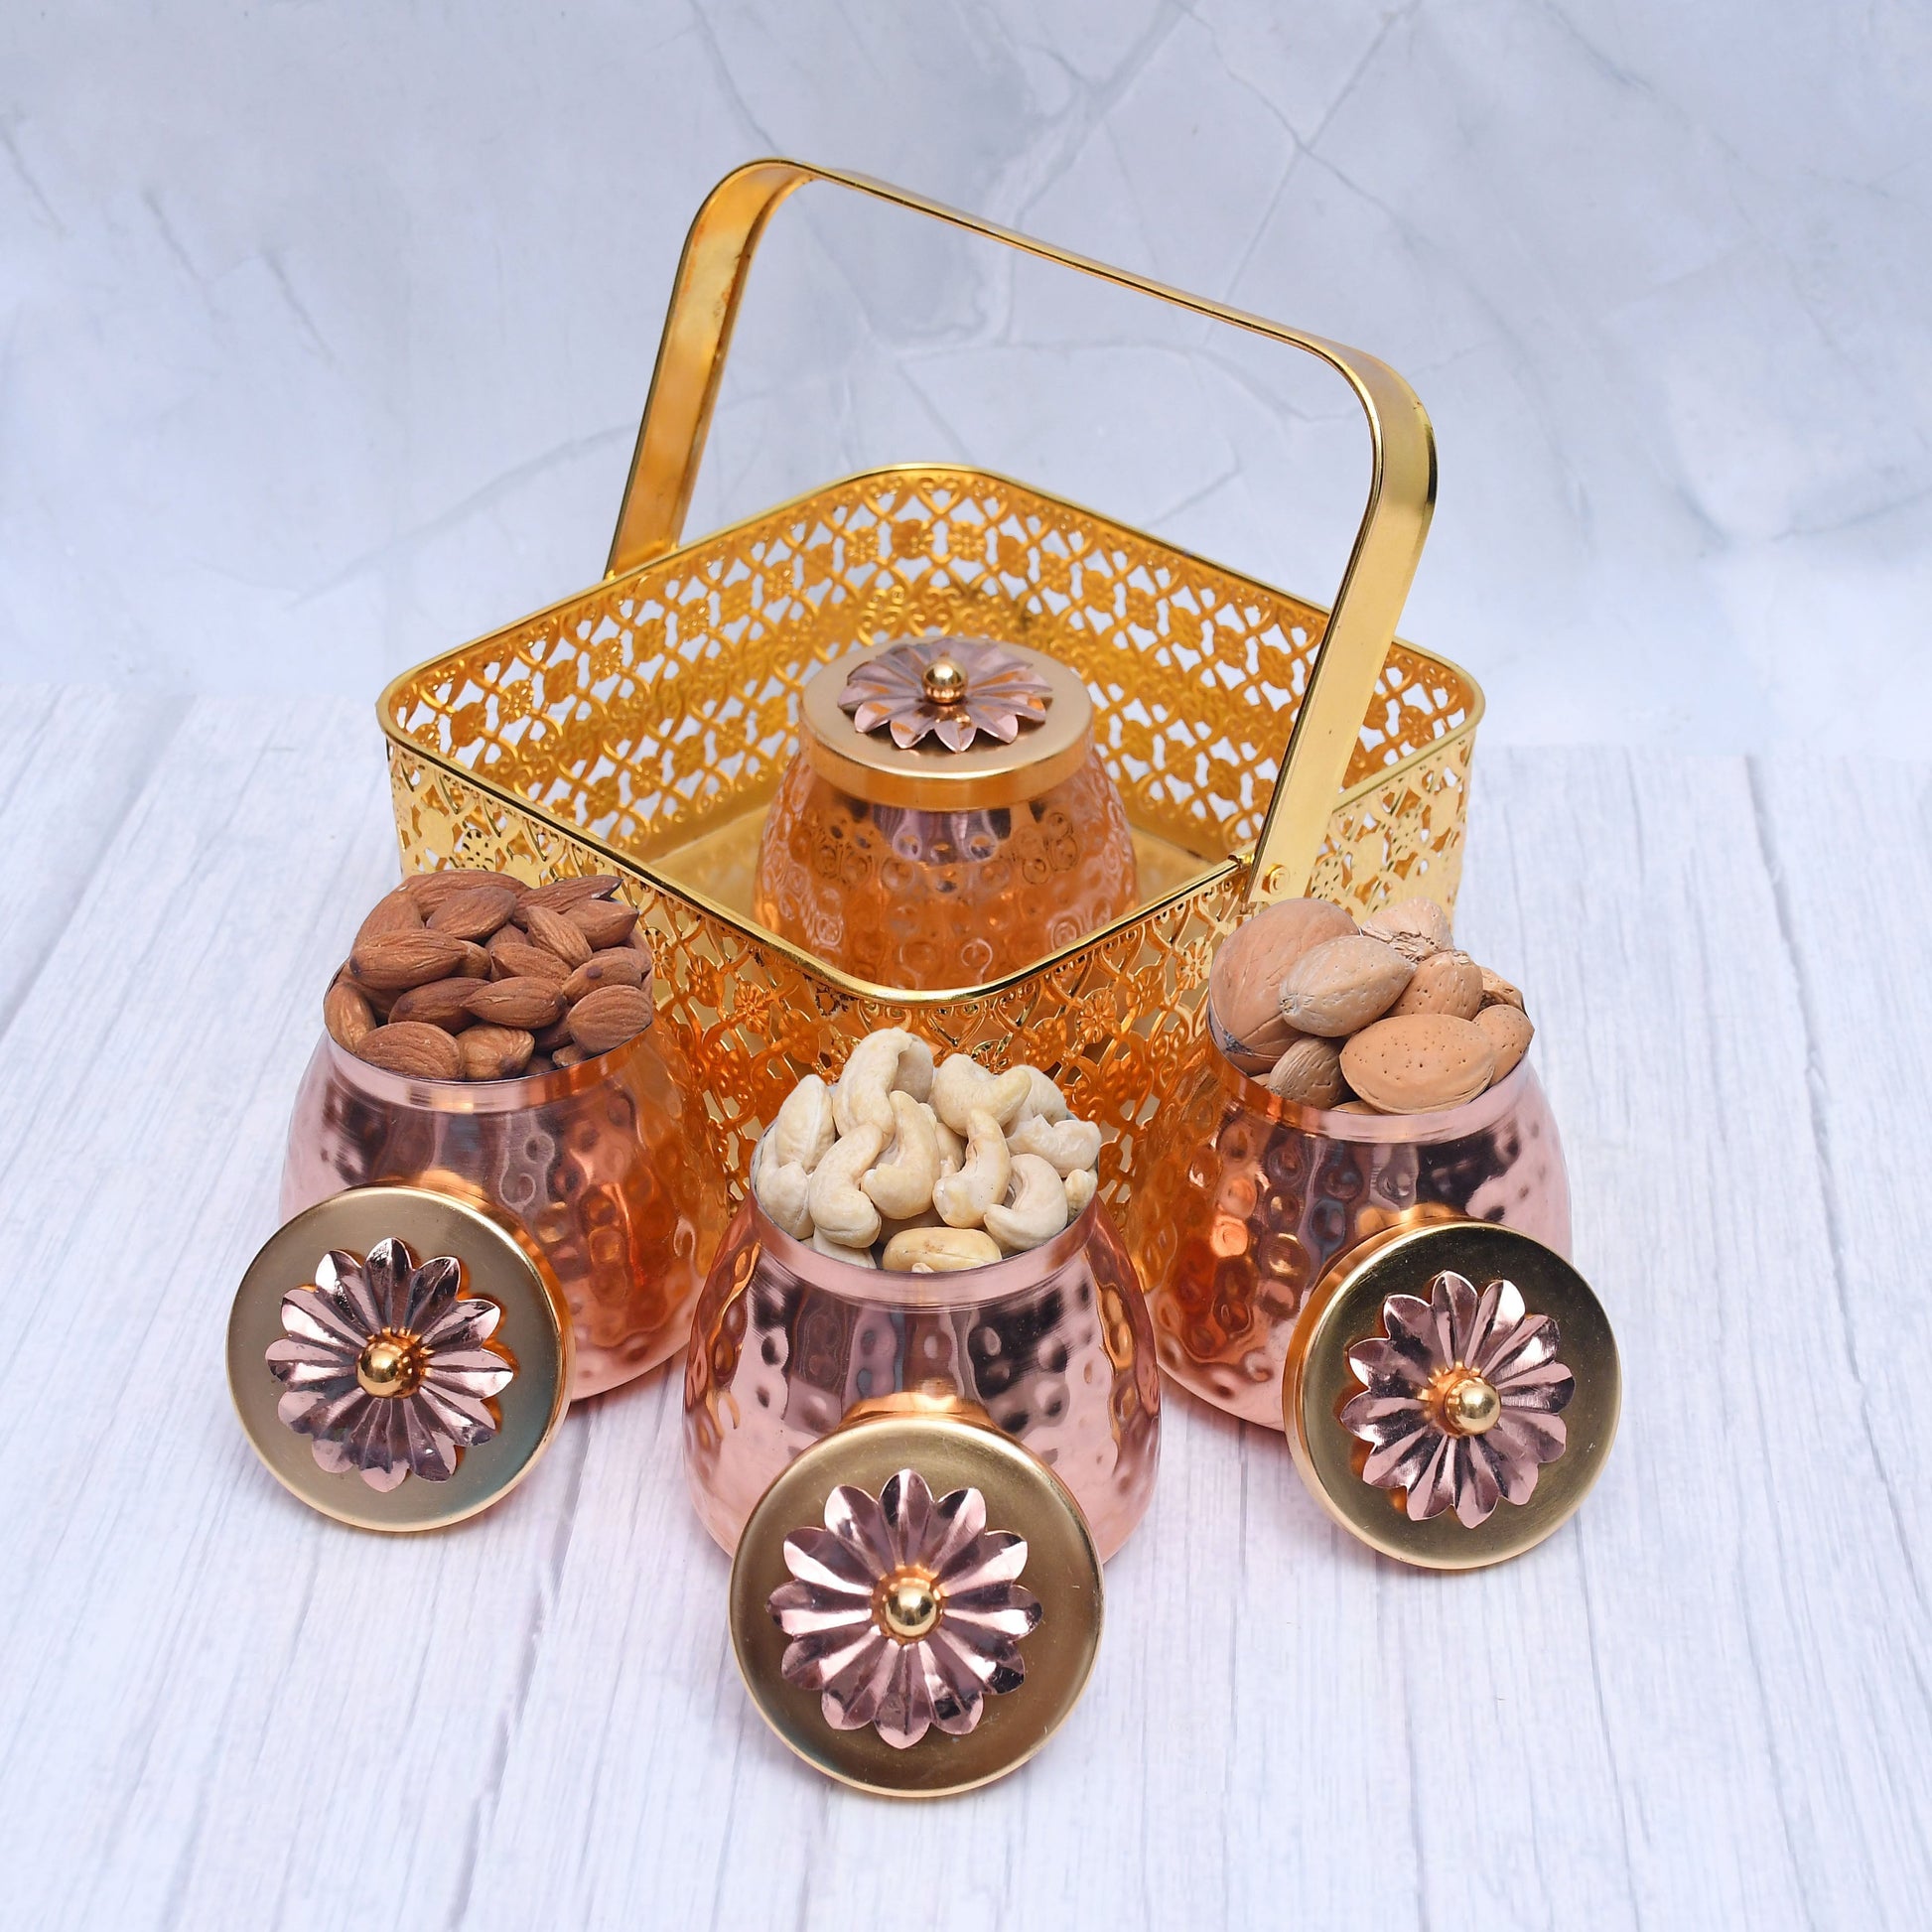 SAMA Homes - exclusive basket with 4 container with copper hammered finish for multi purposes